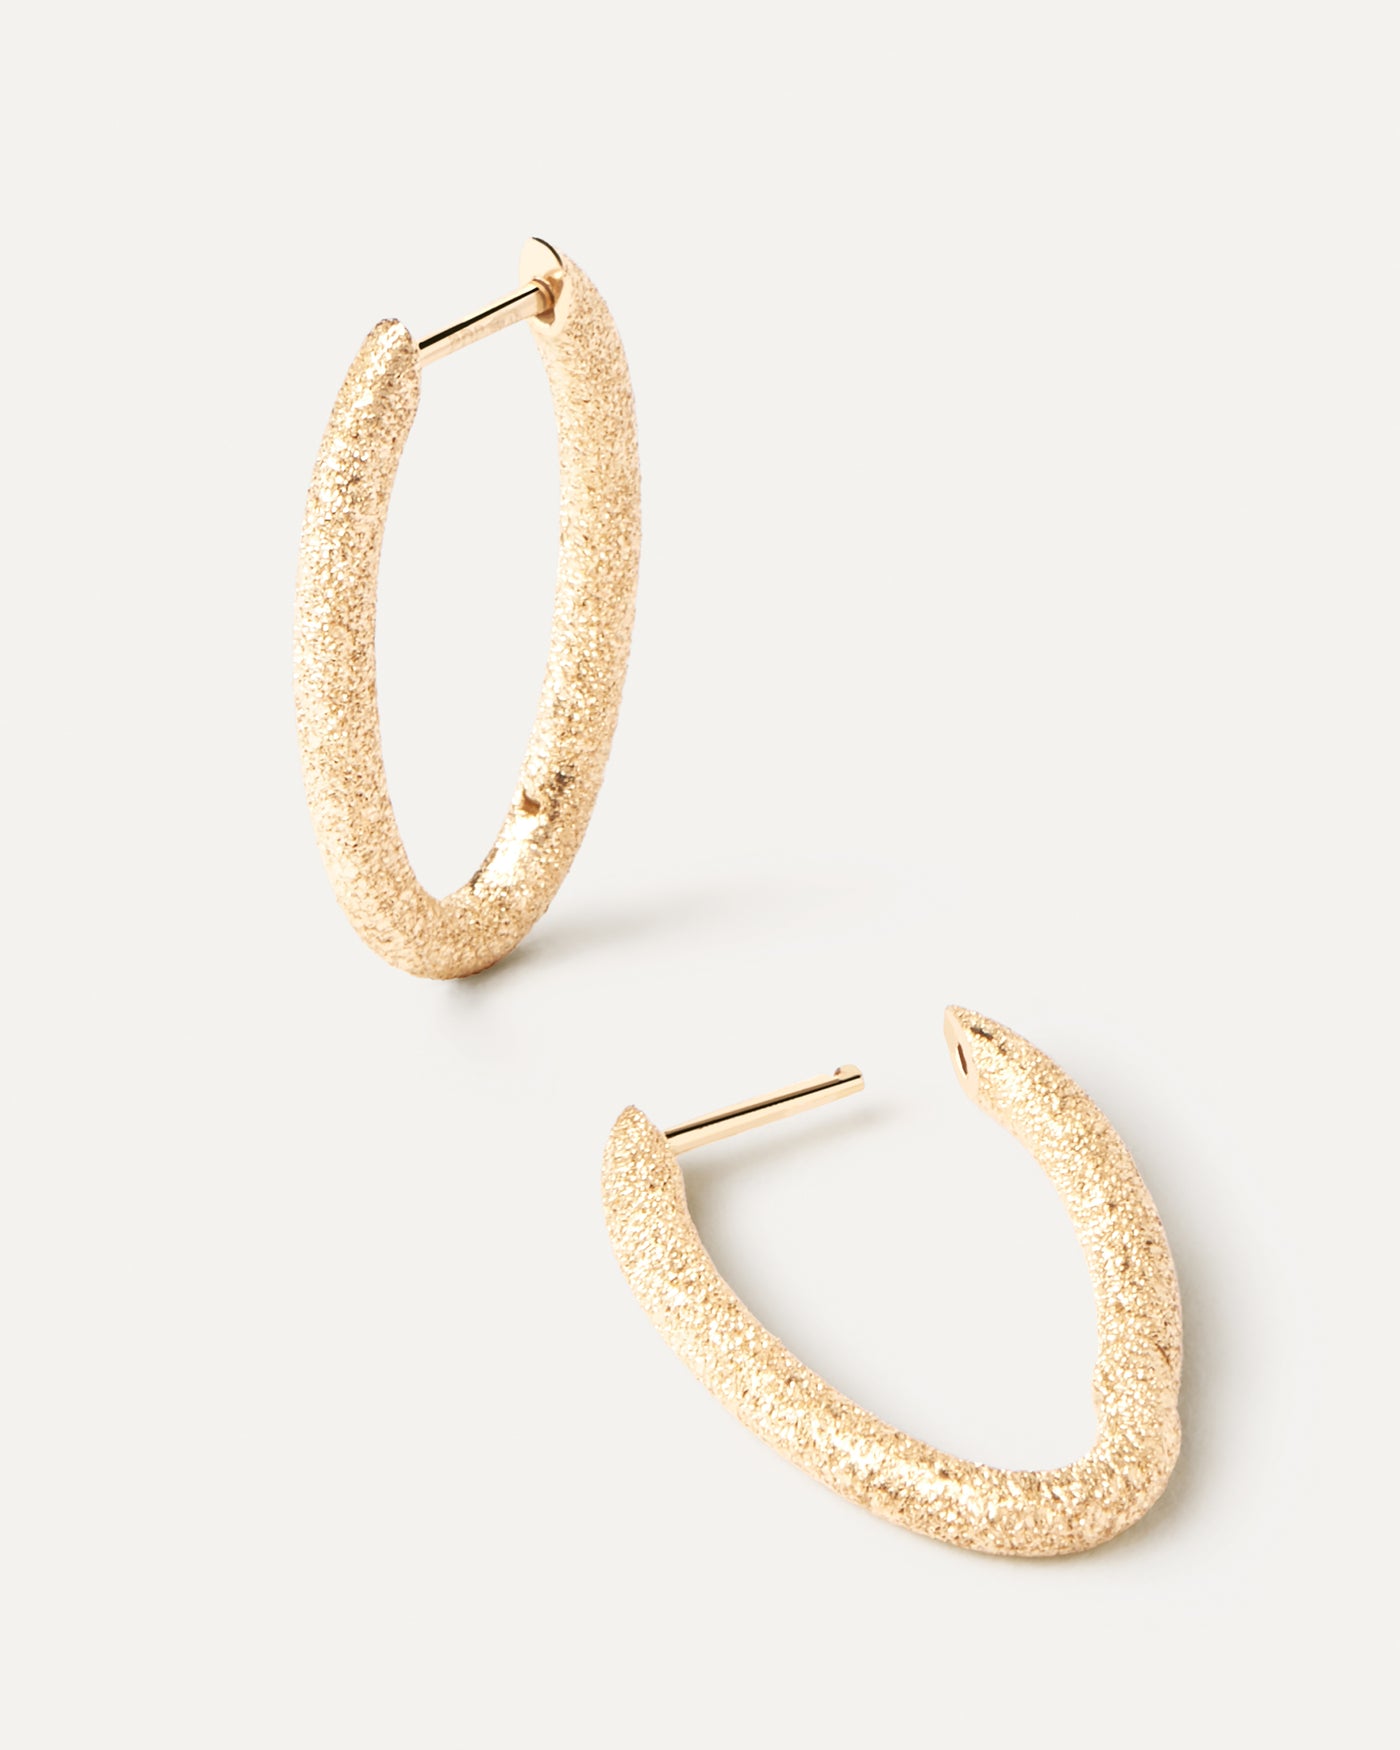 2023 Selection | Sandblasted Gold Vera Hoops. Distinctive oval hoop earrings in solid yellow gold with a sandblast finish. Get the latest arrival from PDPAOLA. Place your order safely and get this Best Seller. Free Shipping.